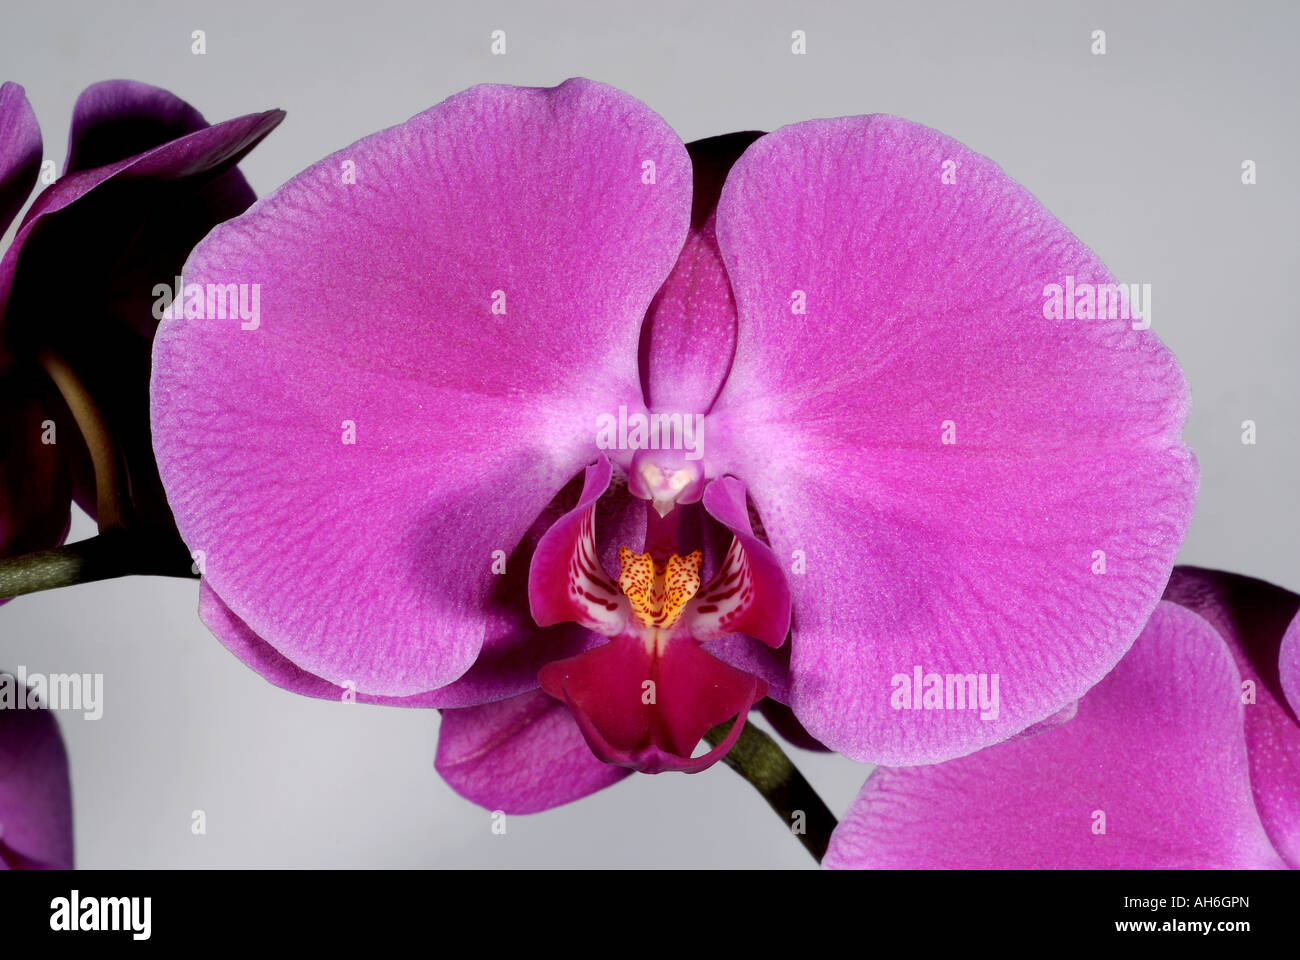 Flower and flower parts of an orchid Phalaenopsis pot plant Stock Photo